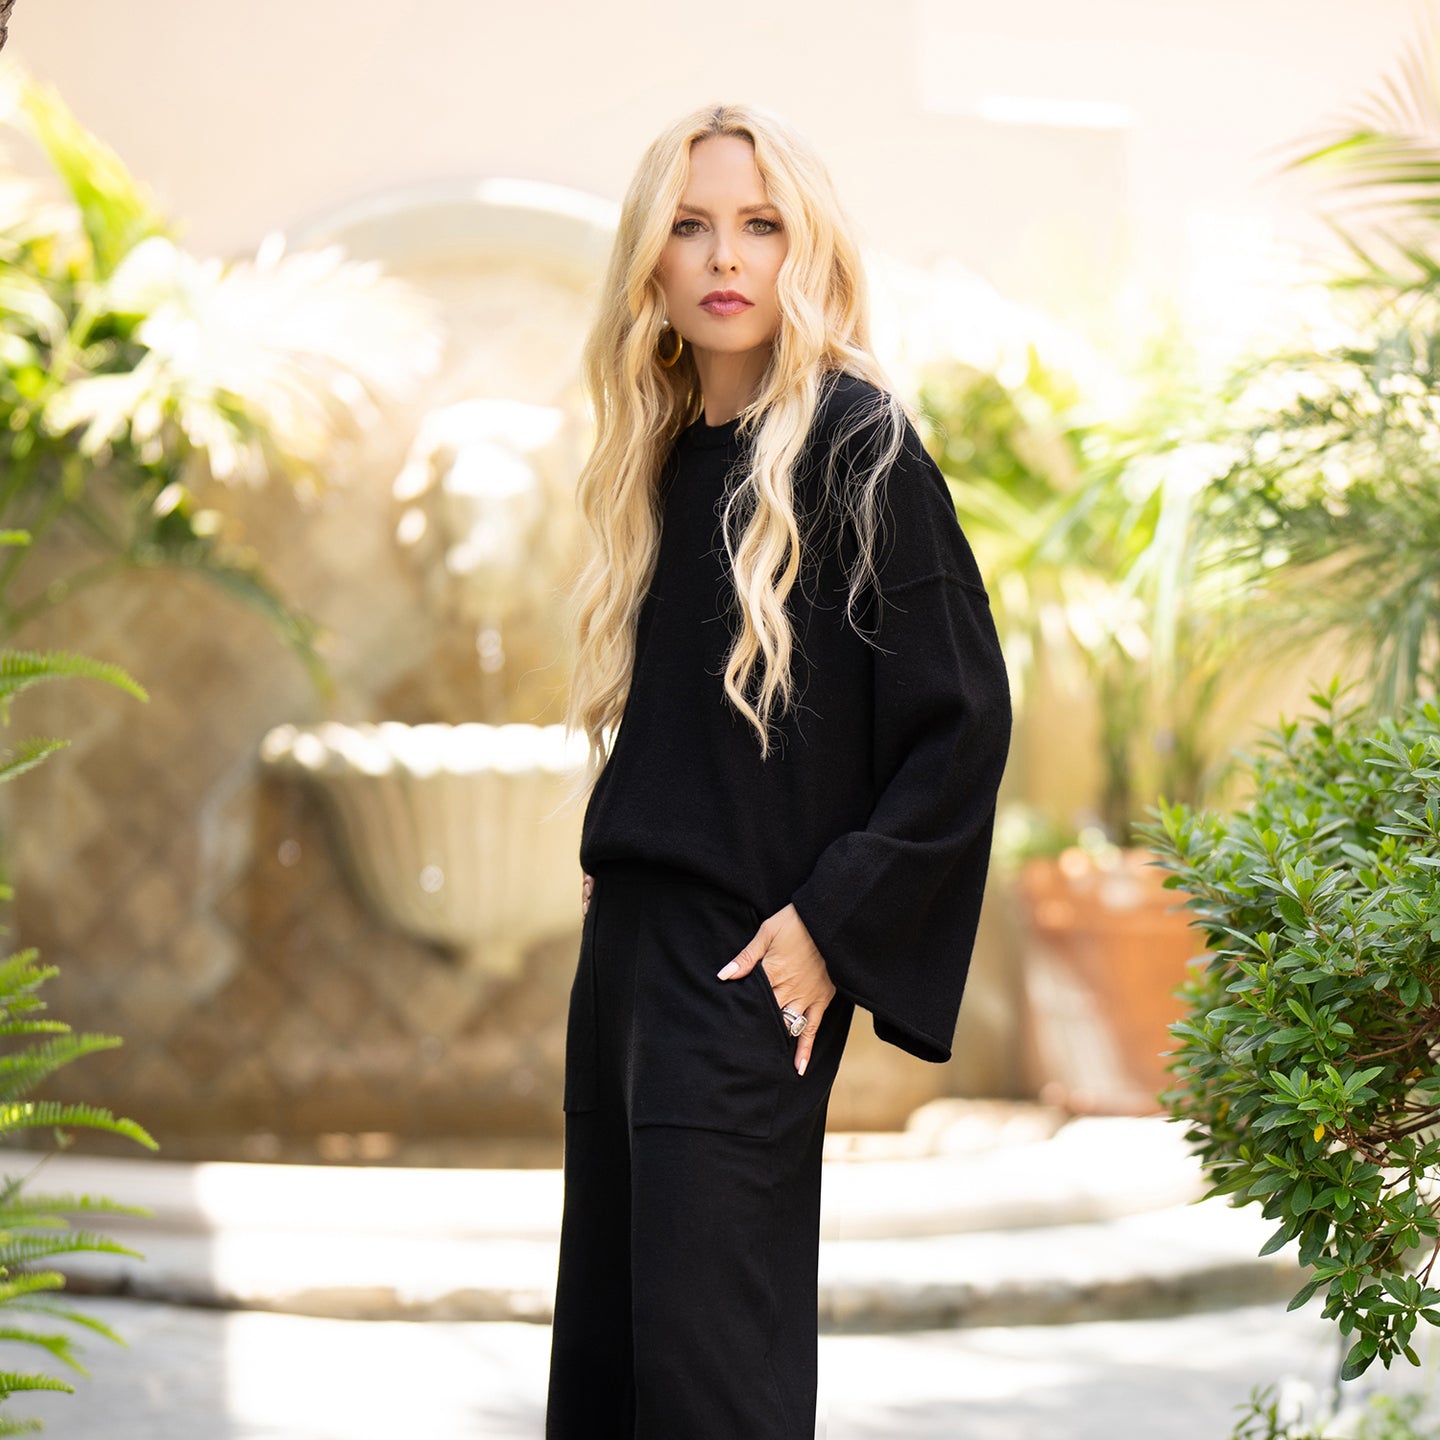 Rachel Zoe - Wearing my red velvet Rachel Zoe Collection suit on repeat  just because..#feelslikeholiday #redisthenewblack head to my  @palisadesvillage boutique to #shoptillyoudrop xoRZ Shop sale here